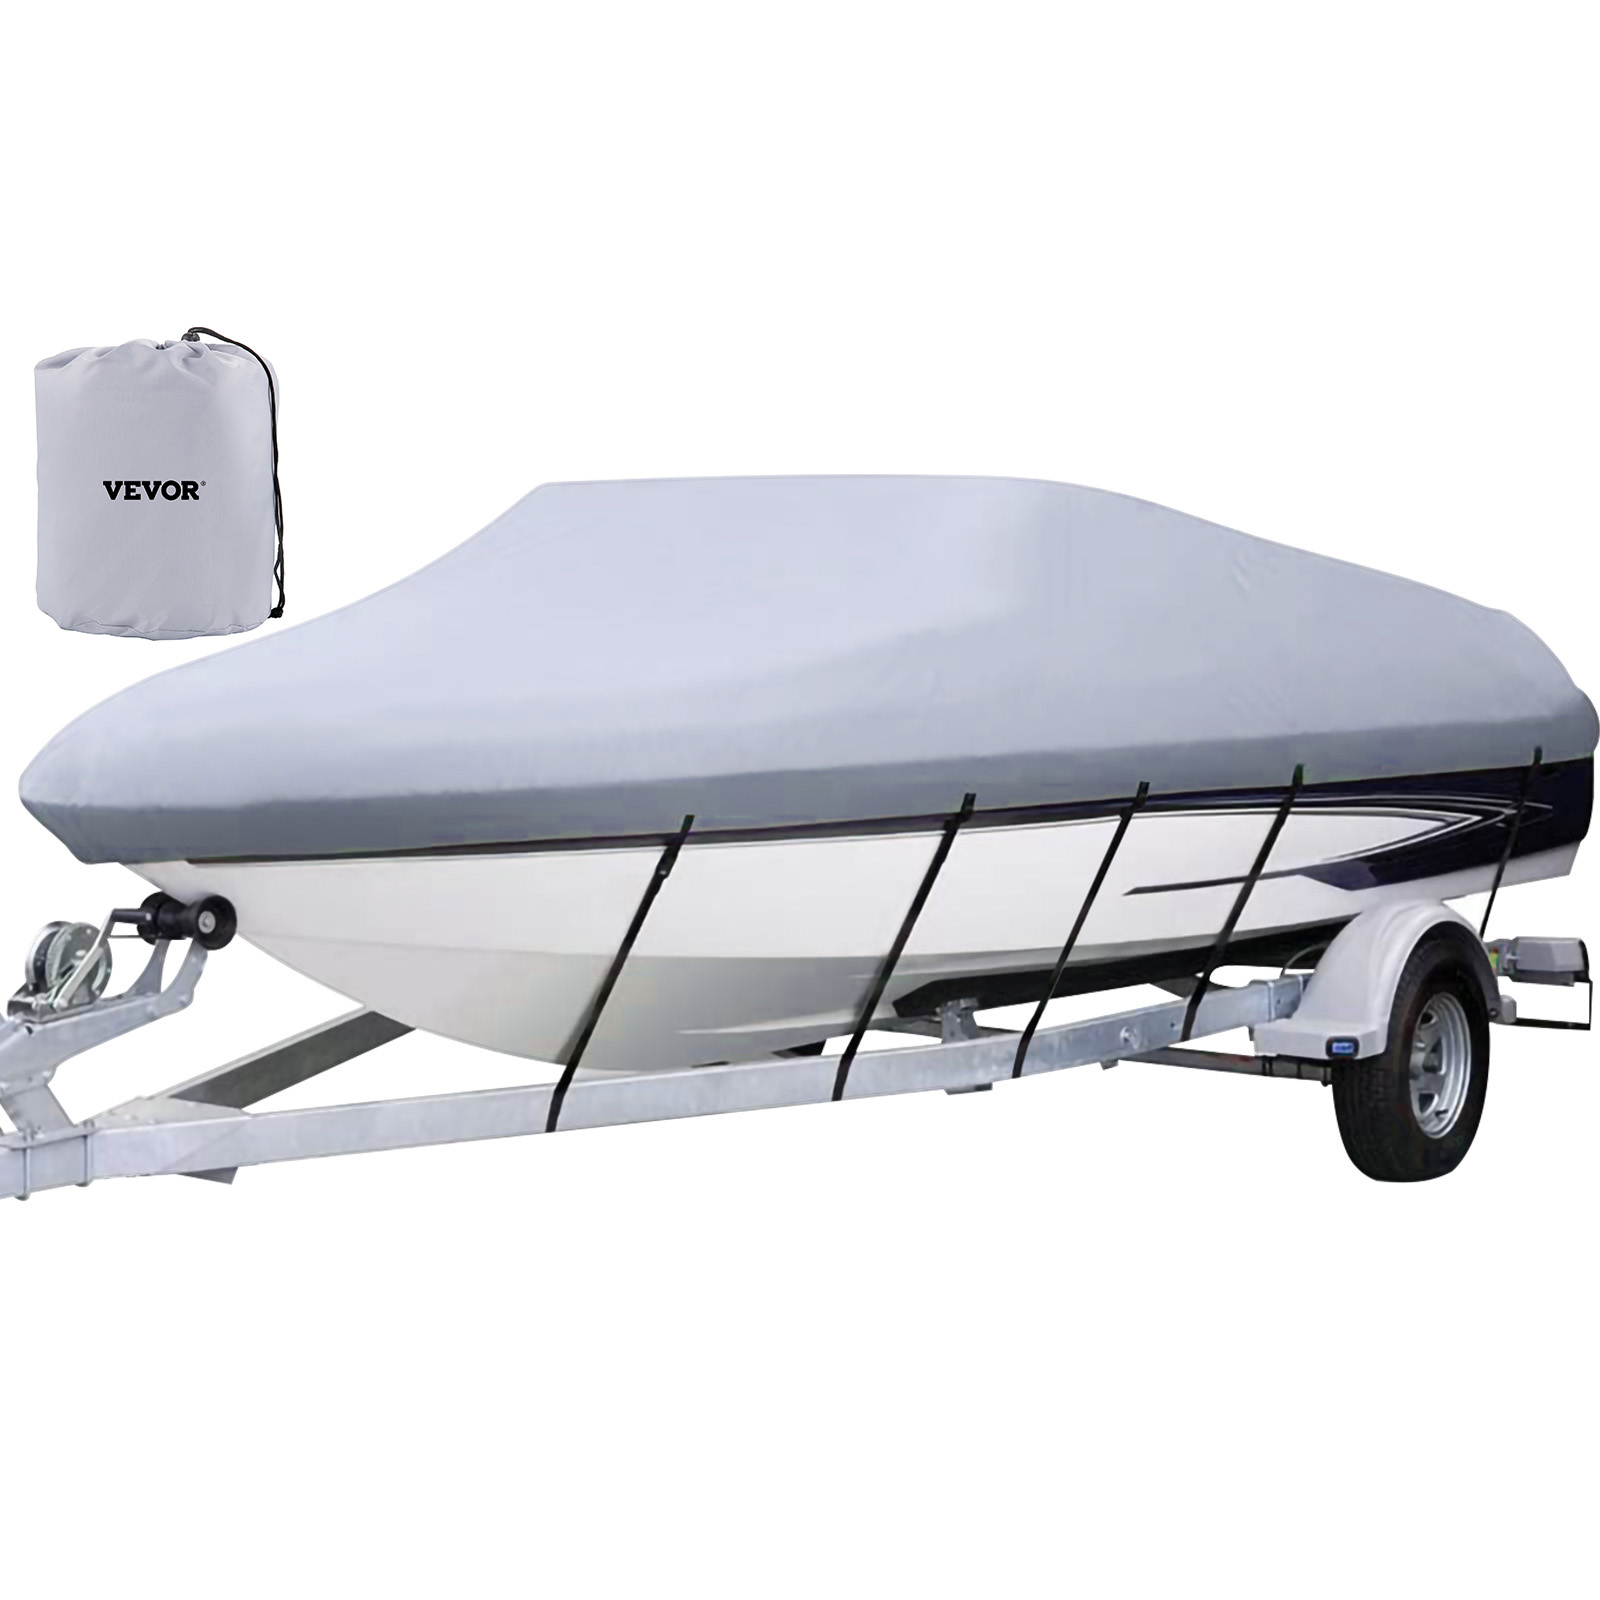 boat cover,14-16ft,600D